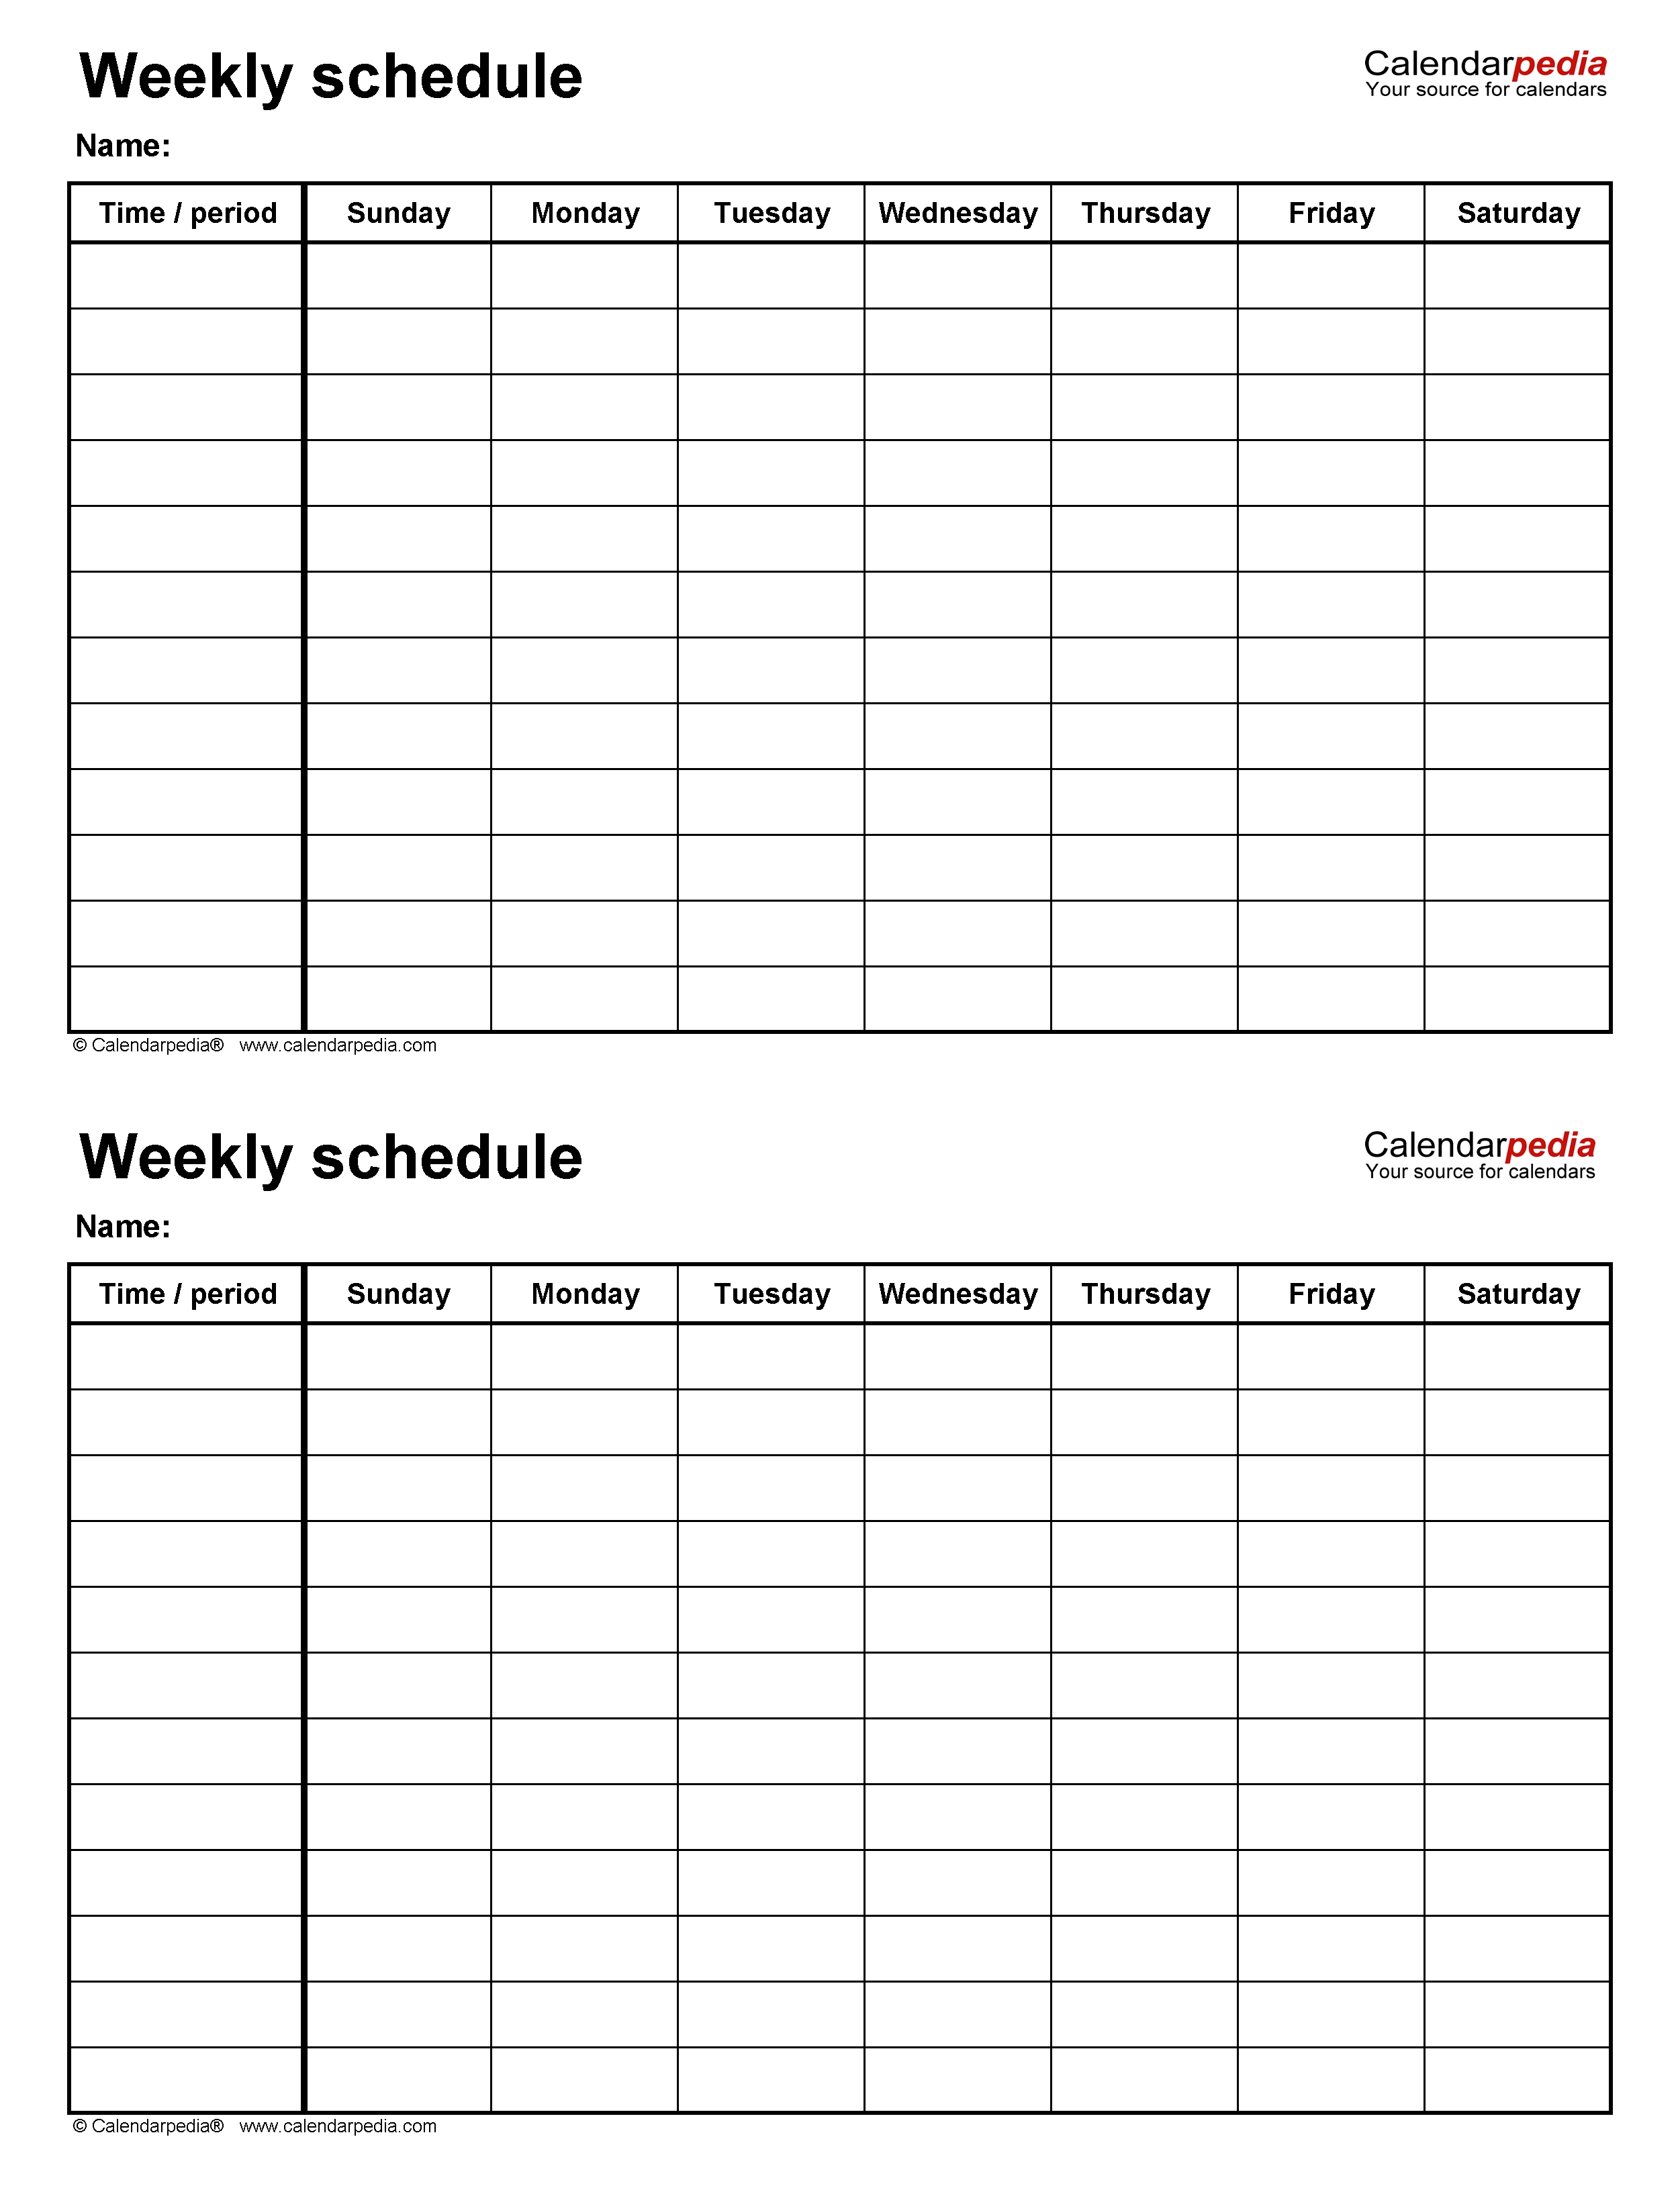 Free Weekly Schedule Templates For Word - 18 Templates 7 Day Calendar Template